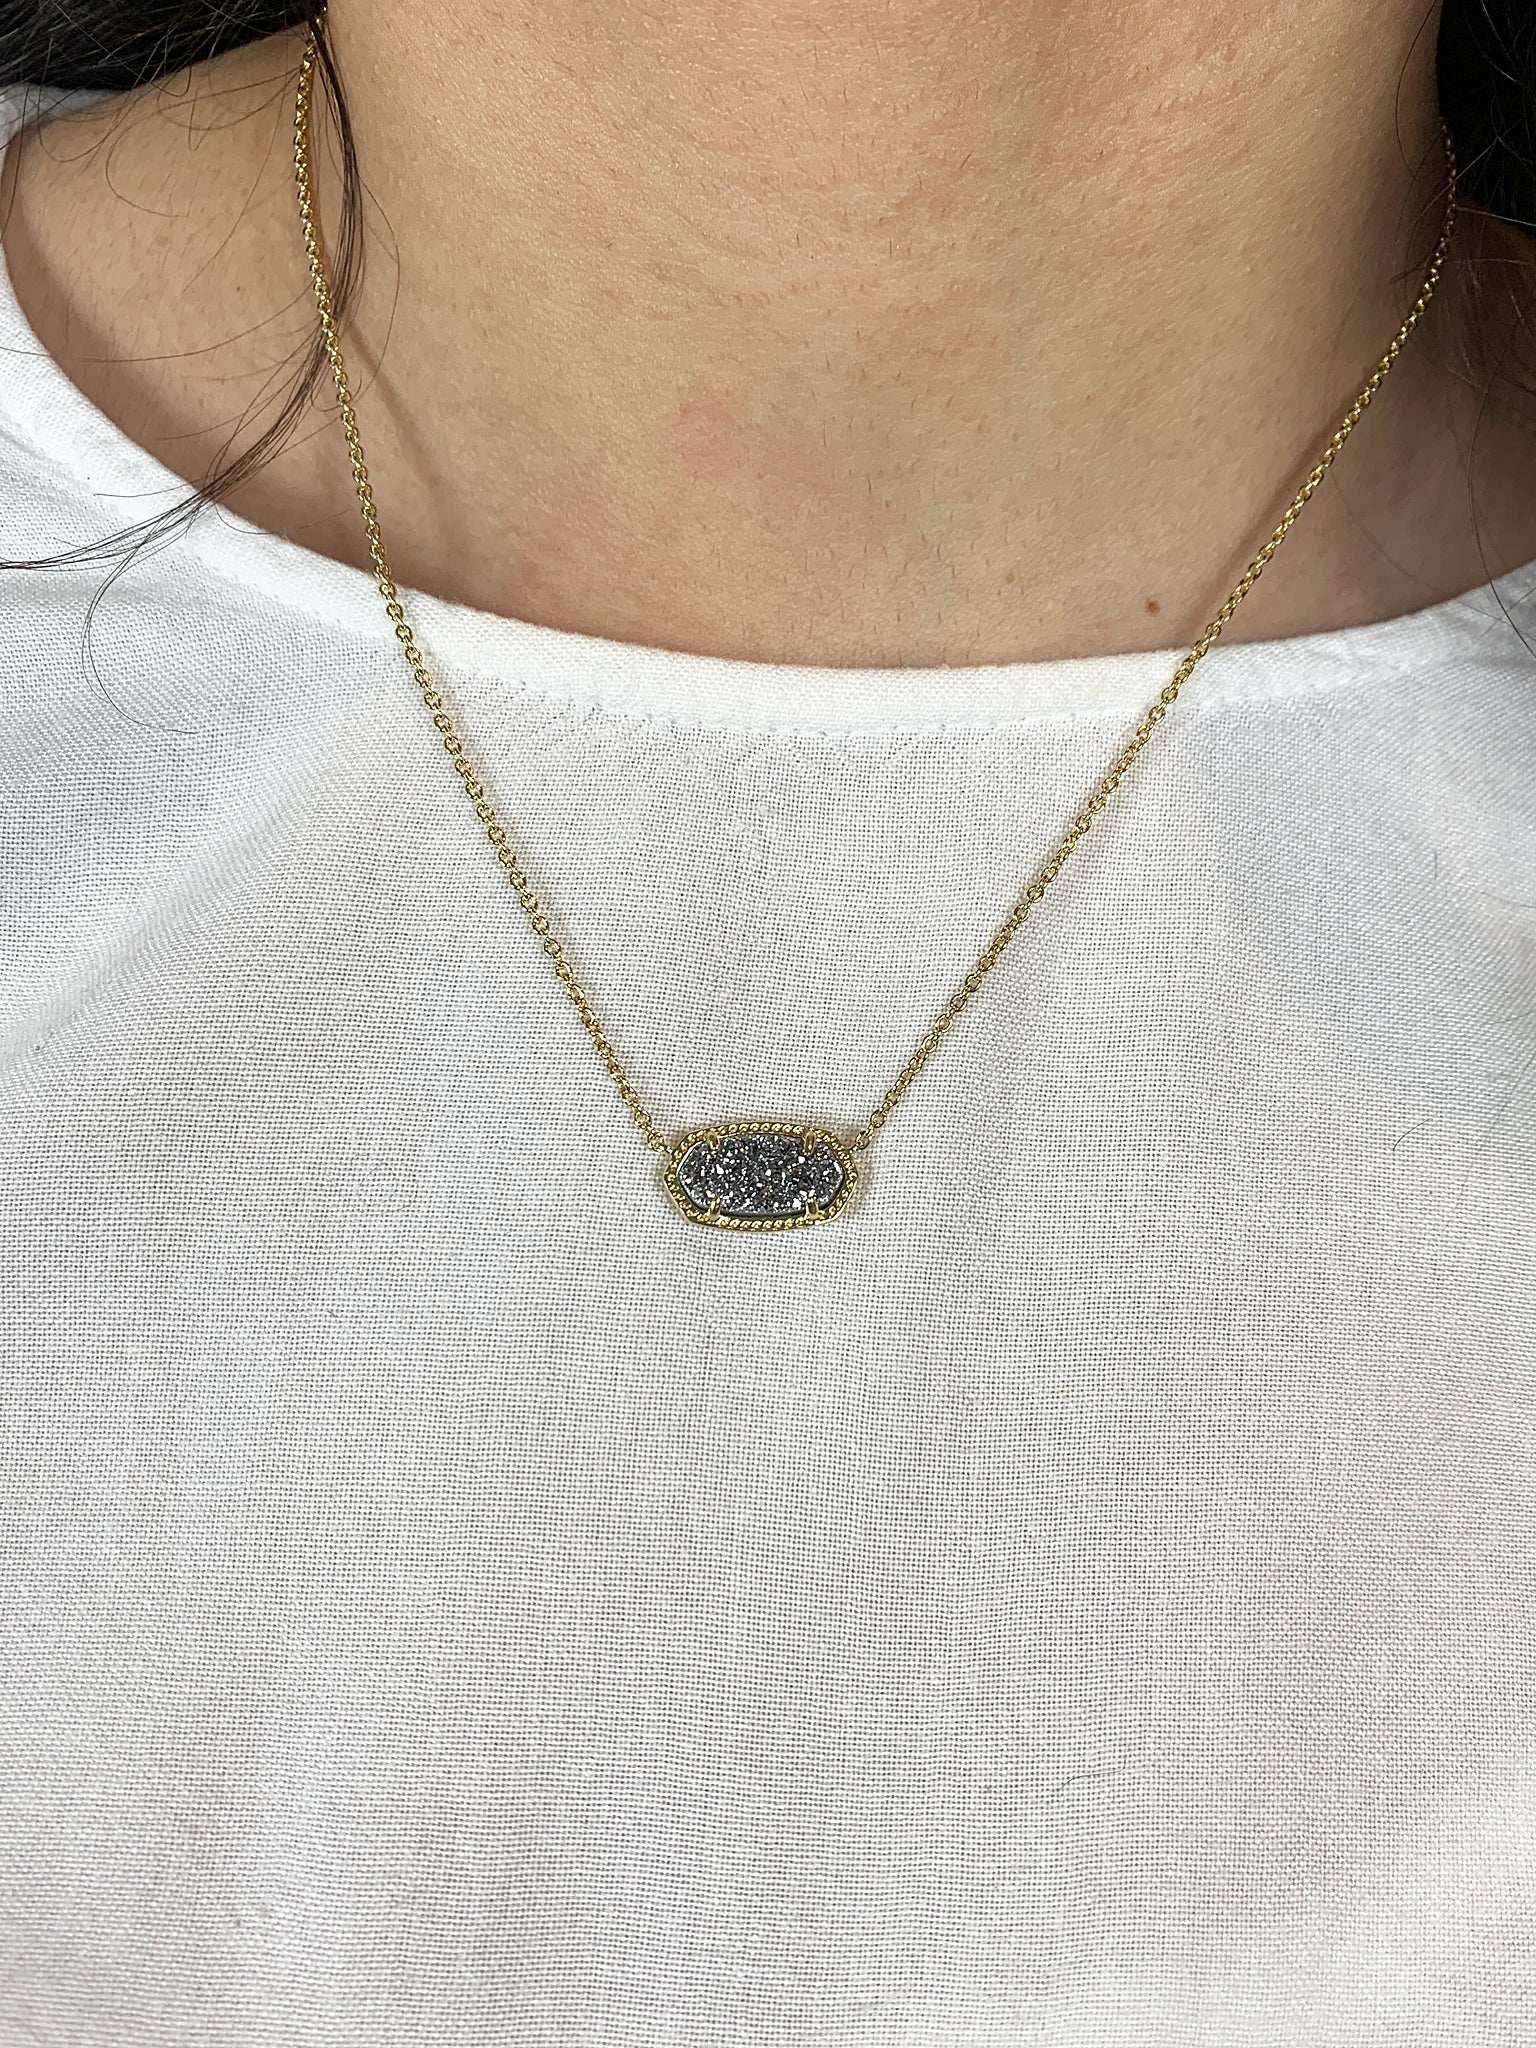 Kendra Scott Elisa Oval Pendant Necklace in Platinum Drusy and Gold